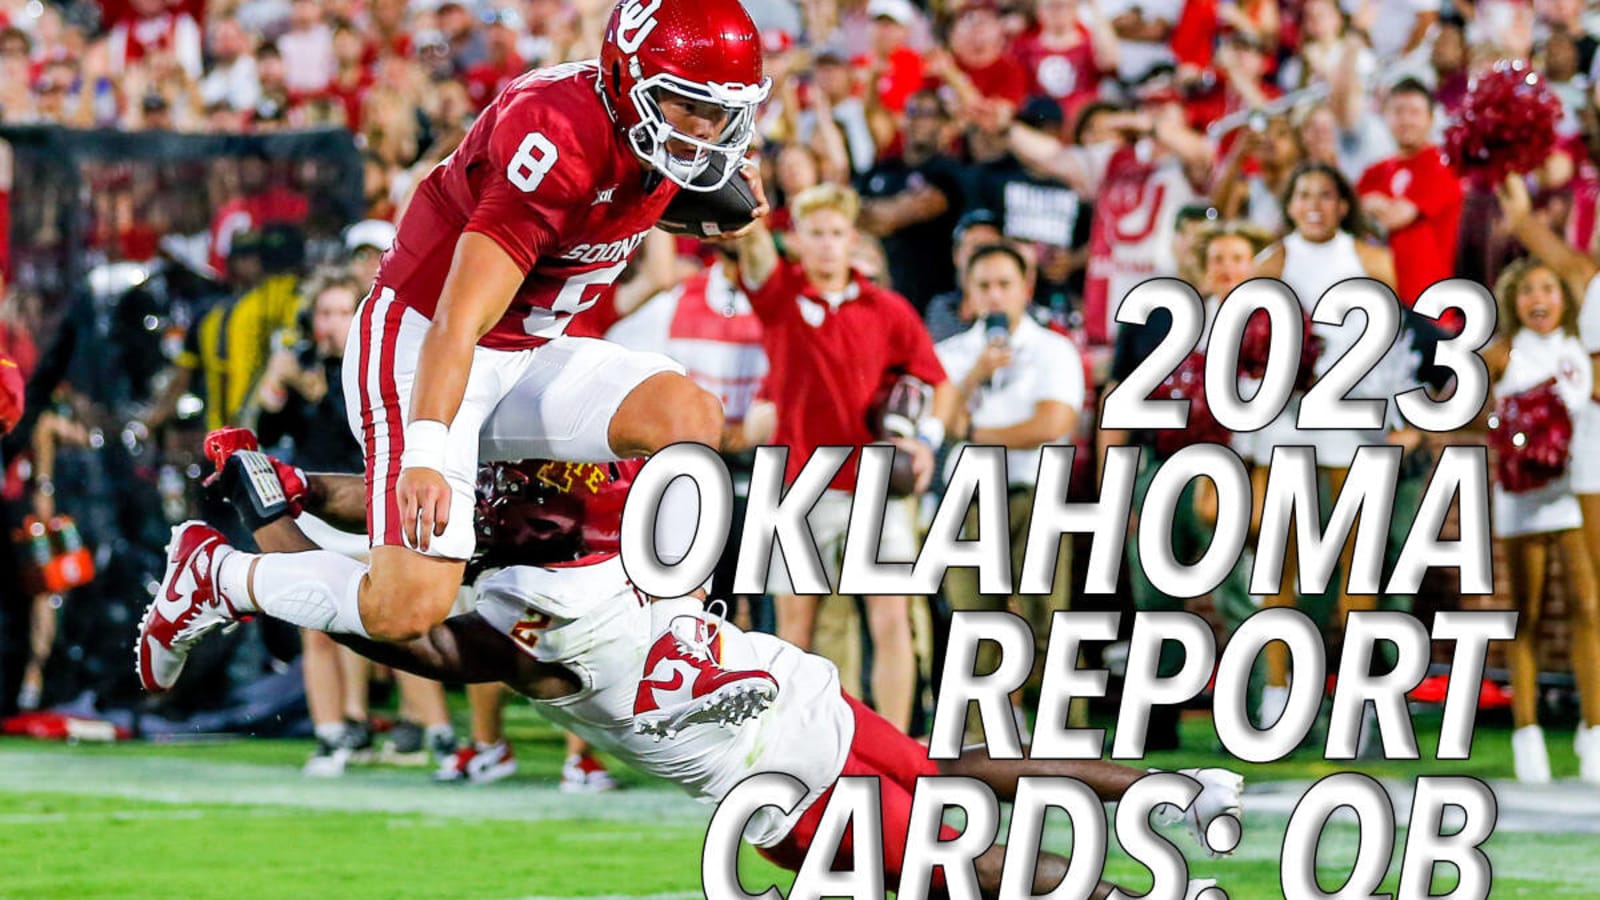 Oklahoma 2023 Report Cards: Dillon Gabriel Closes OU Stay With Career Year